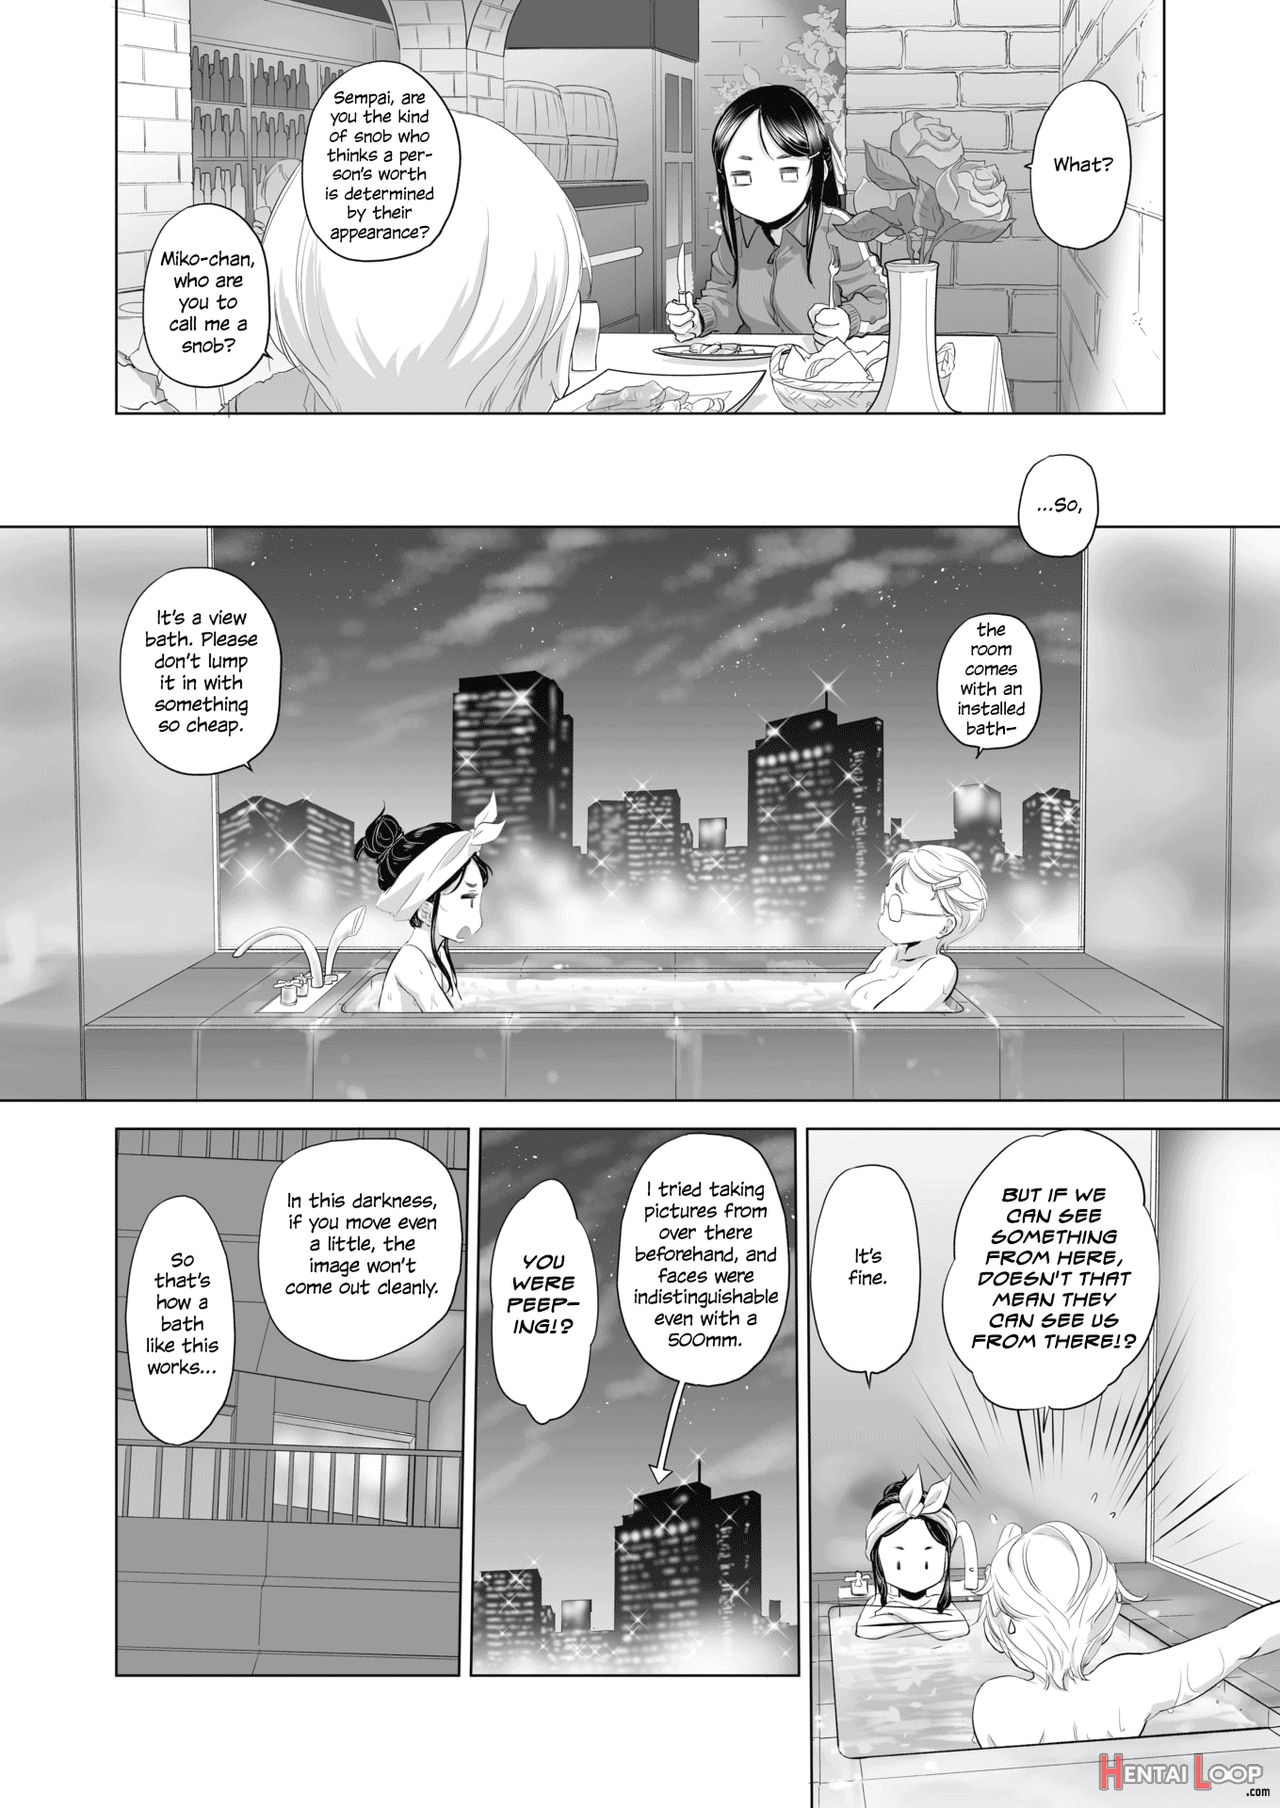 Tae-chan And Jimiko-san Ch. 1-25 page 9